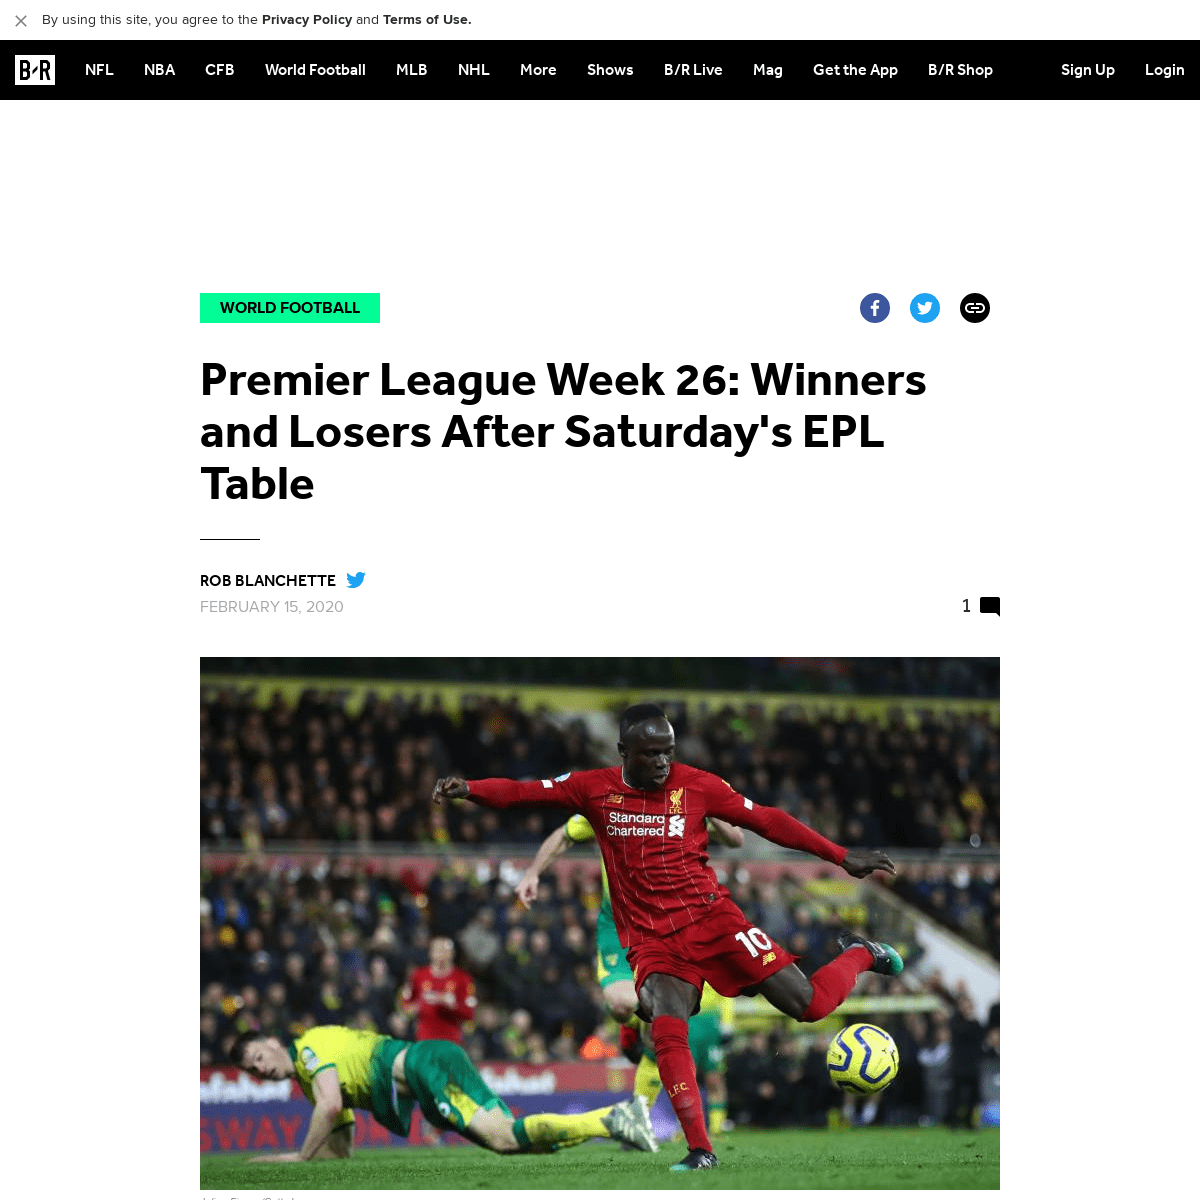 A complete backup of bleacherreport.com/articles/2876491-premier-league-week-26-winners-and-losers-after-saturdays-epl-table